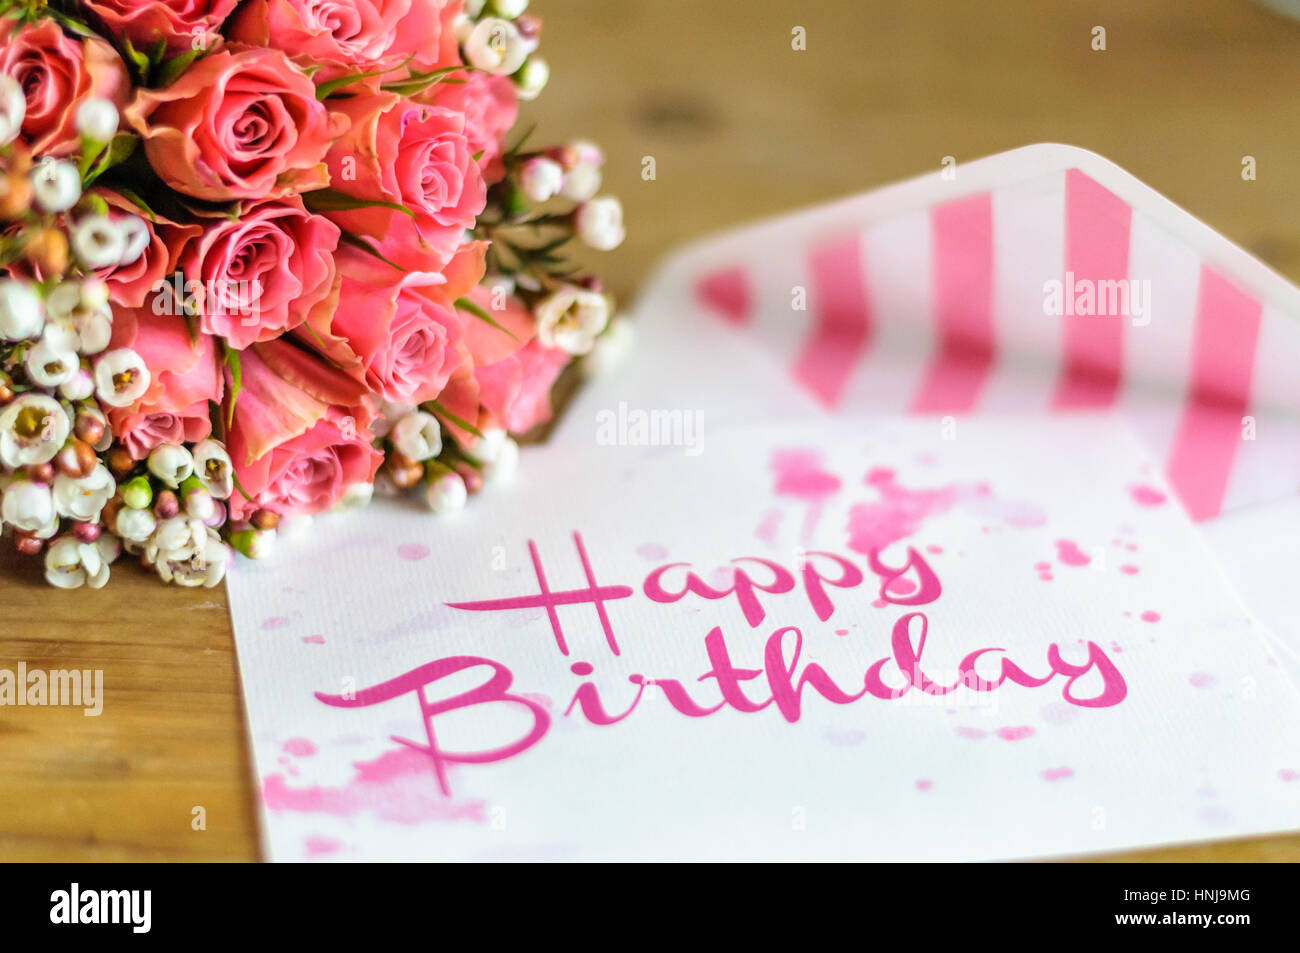 Happy Birthday Greeting Card With Color Fitting Bouquet Of Flowers Stock Photo Alamy